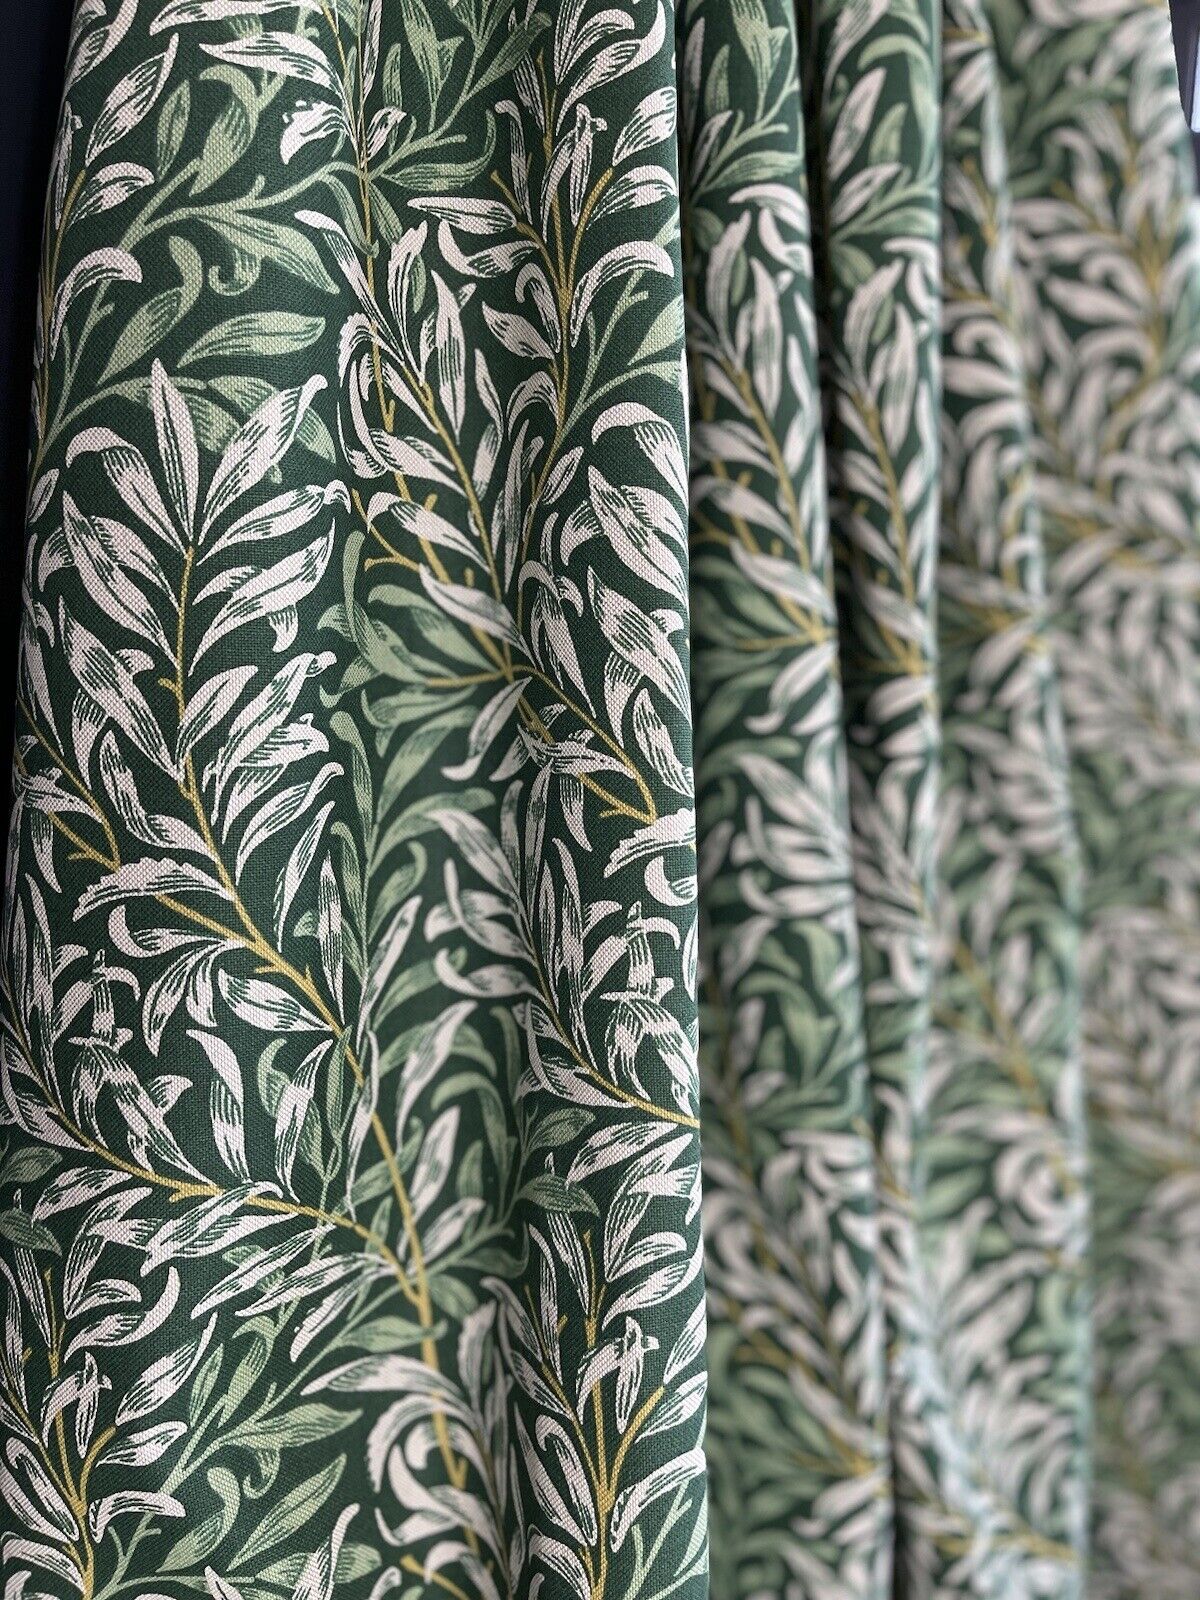 Green Sewing Material By Yards Meter's Linen Look Botanical Printed Cotton Fabric by Meter Leaves Print Textile